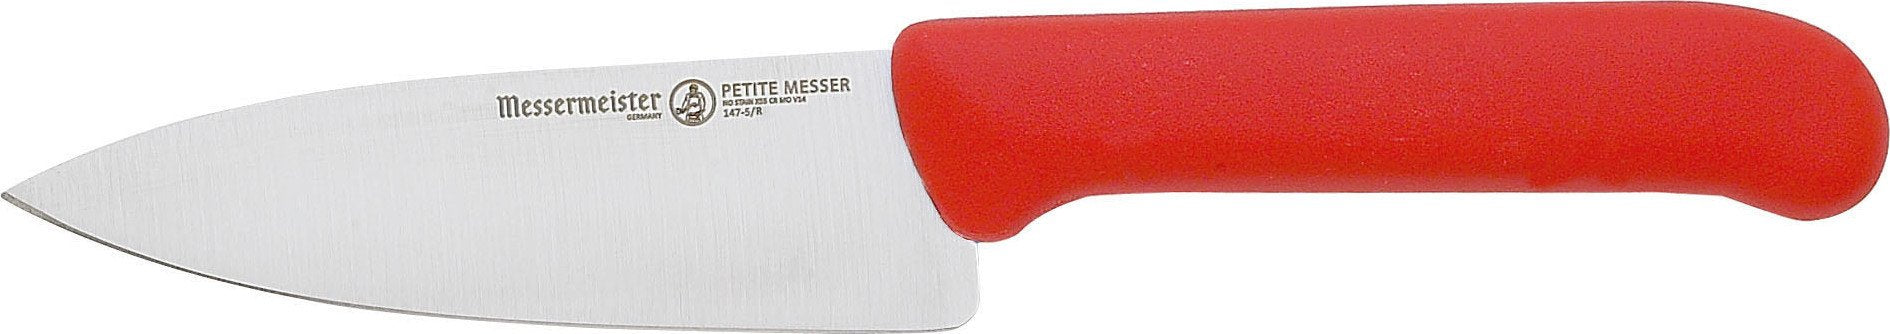 Messermeister - Red Petite Messer 5" Chef's Knife - 147-5/R